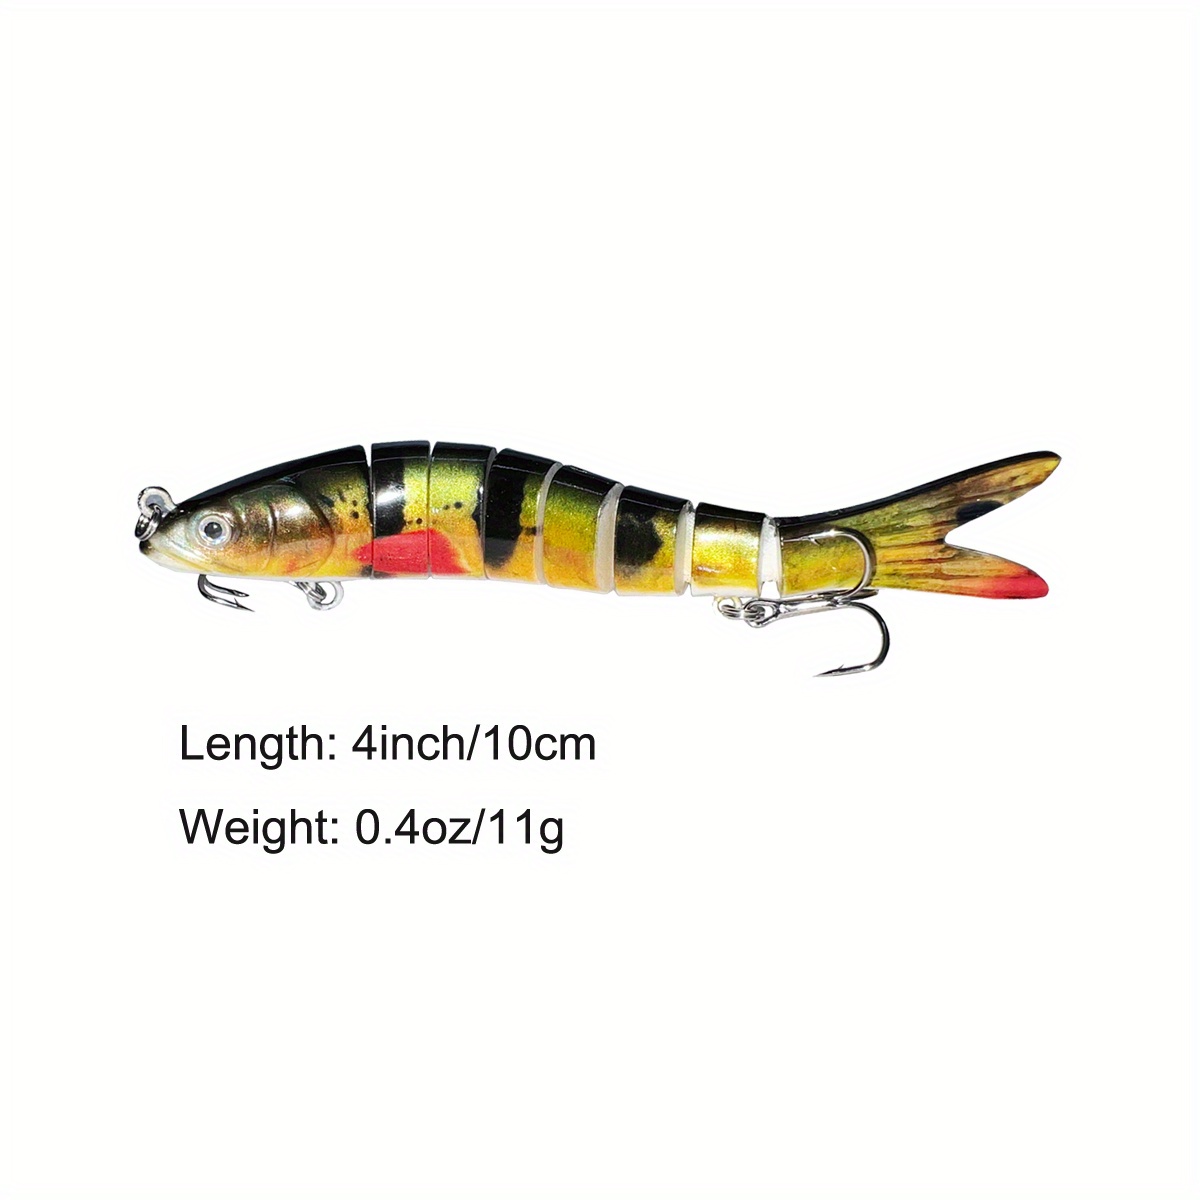 Buy Masllutn Freshwater Lures for Bass,Lifelike Artificial Bass